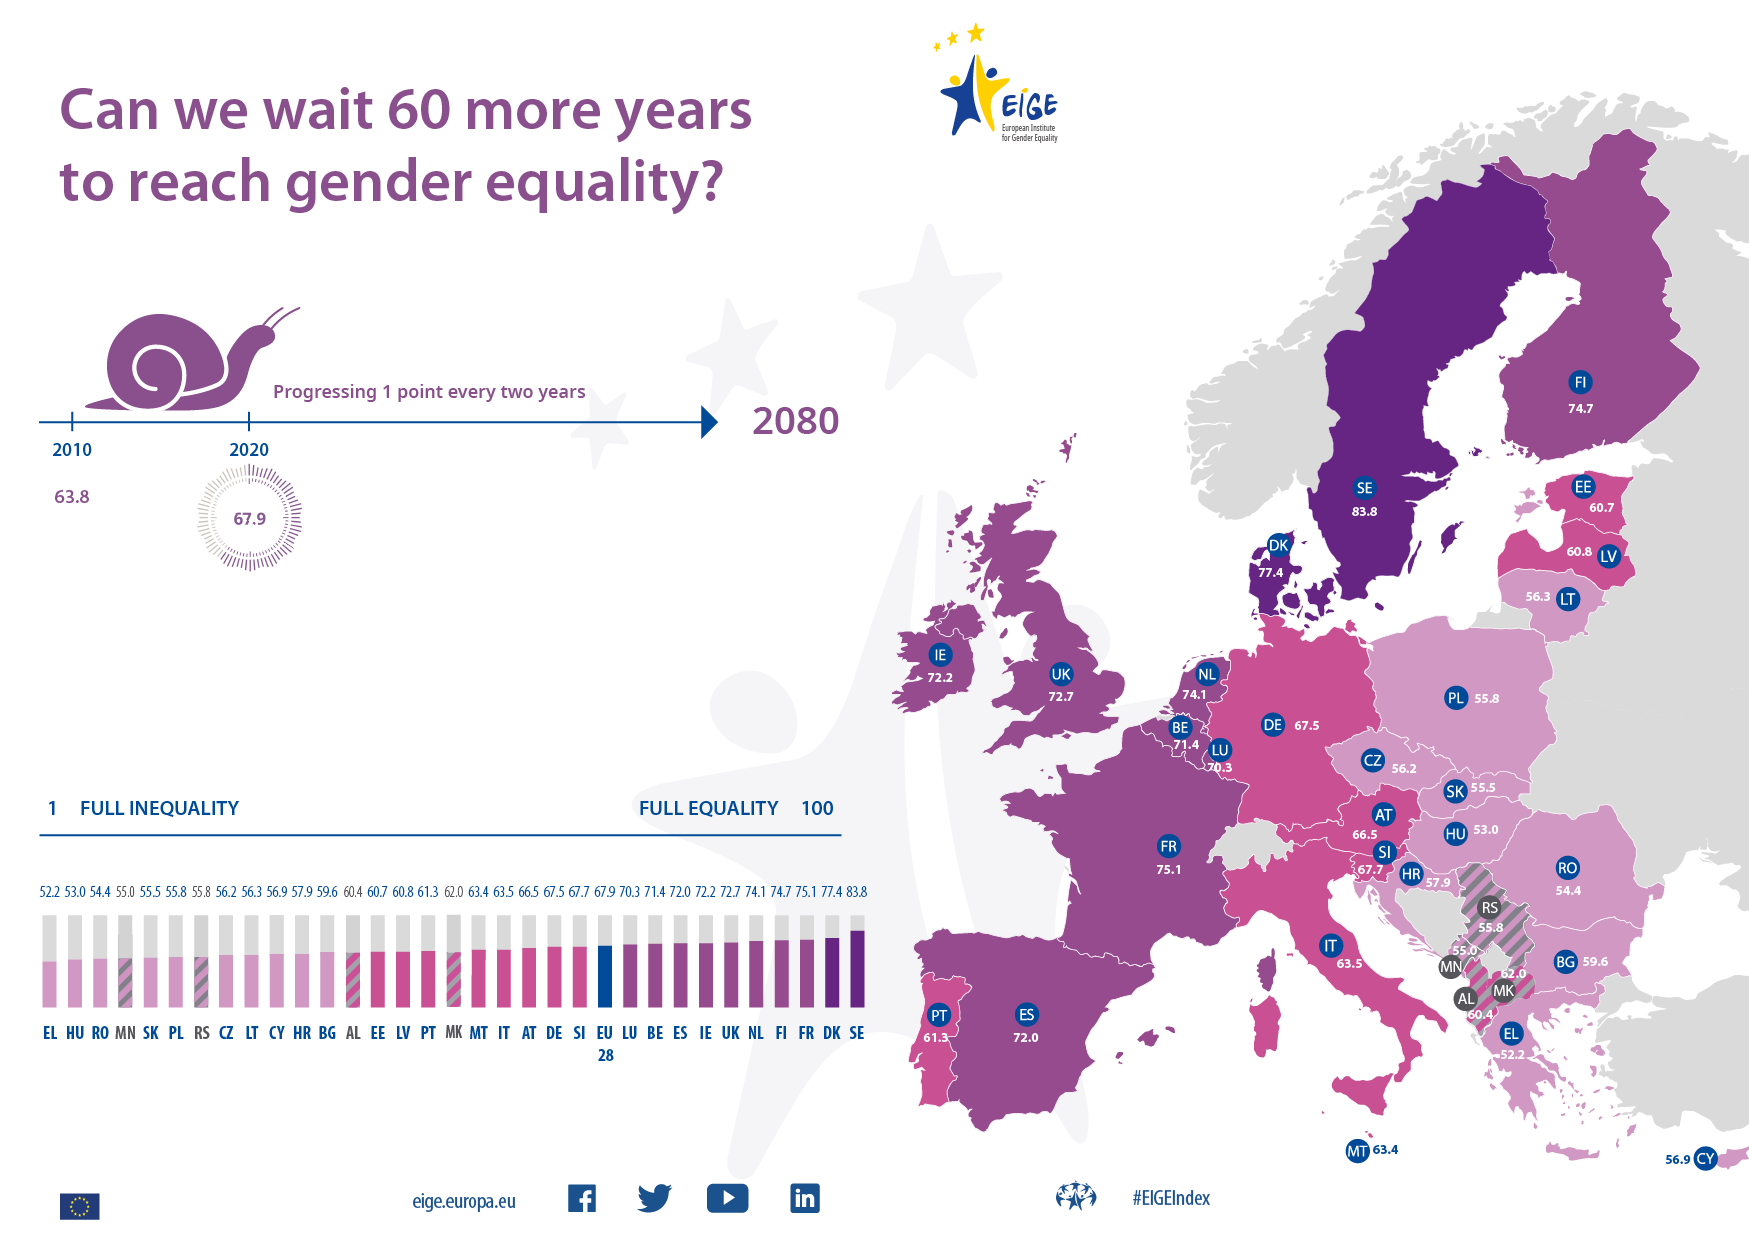 A map of Europe showing the Gender Equality Index scores of the EU Member States, EU candidate countries and potential candidates